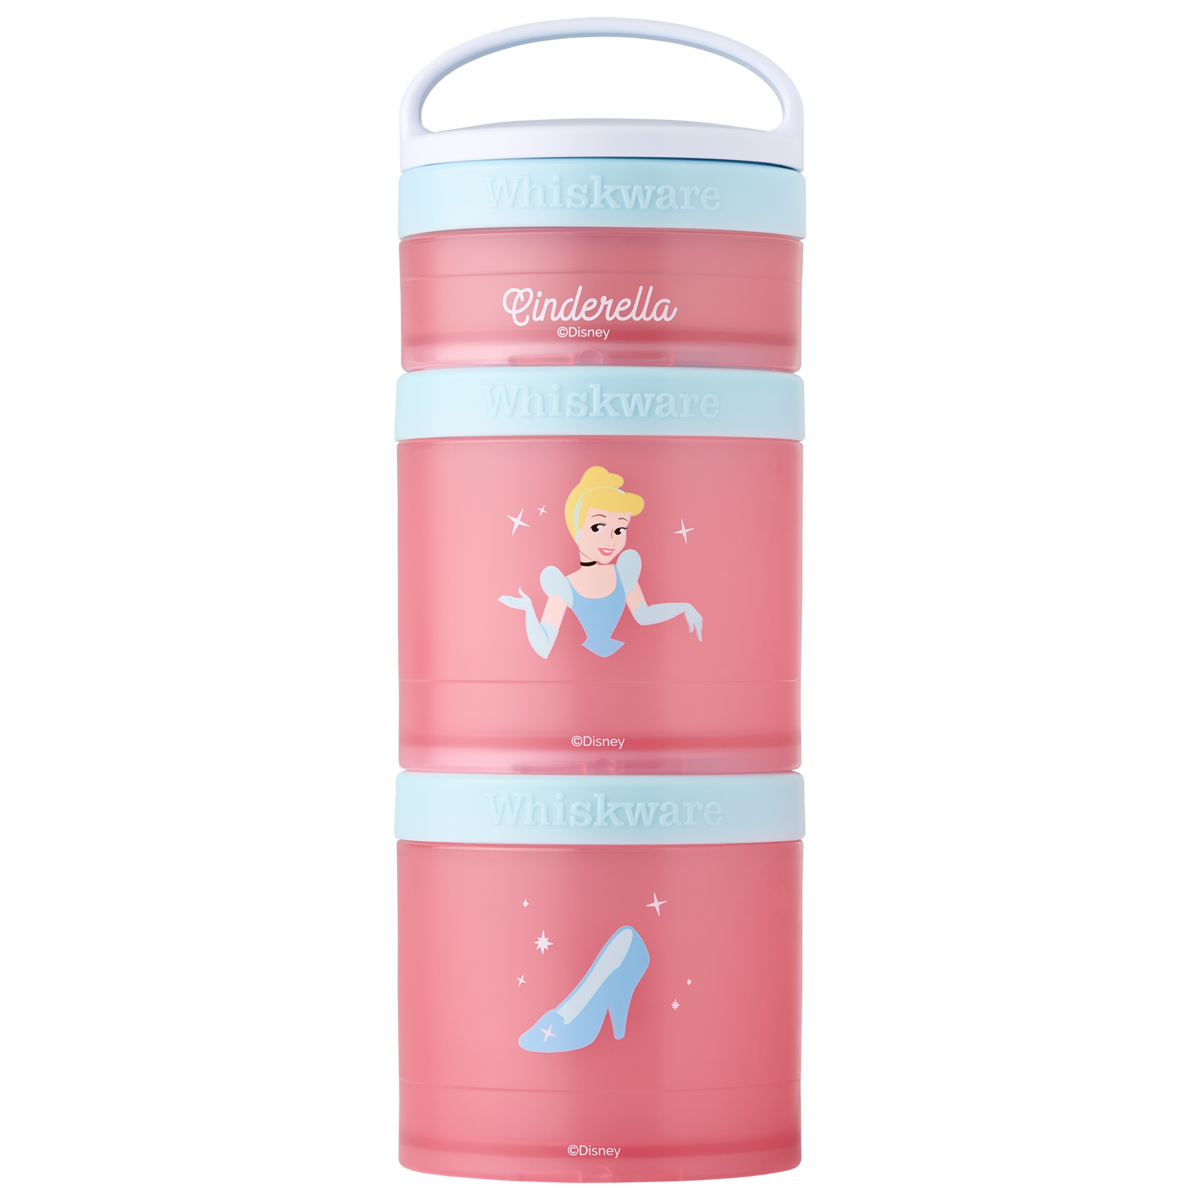 Whiskware Disney Stackable Snack Pack Containers - Cinderella & Slipper